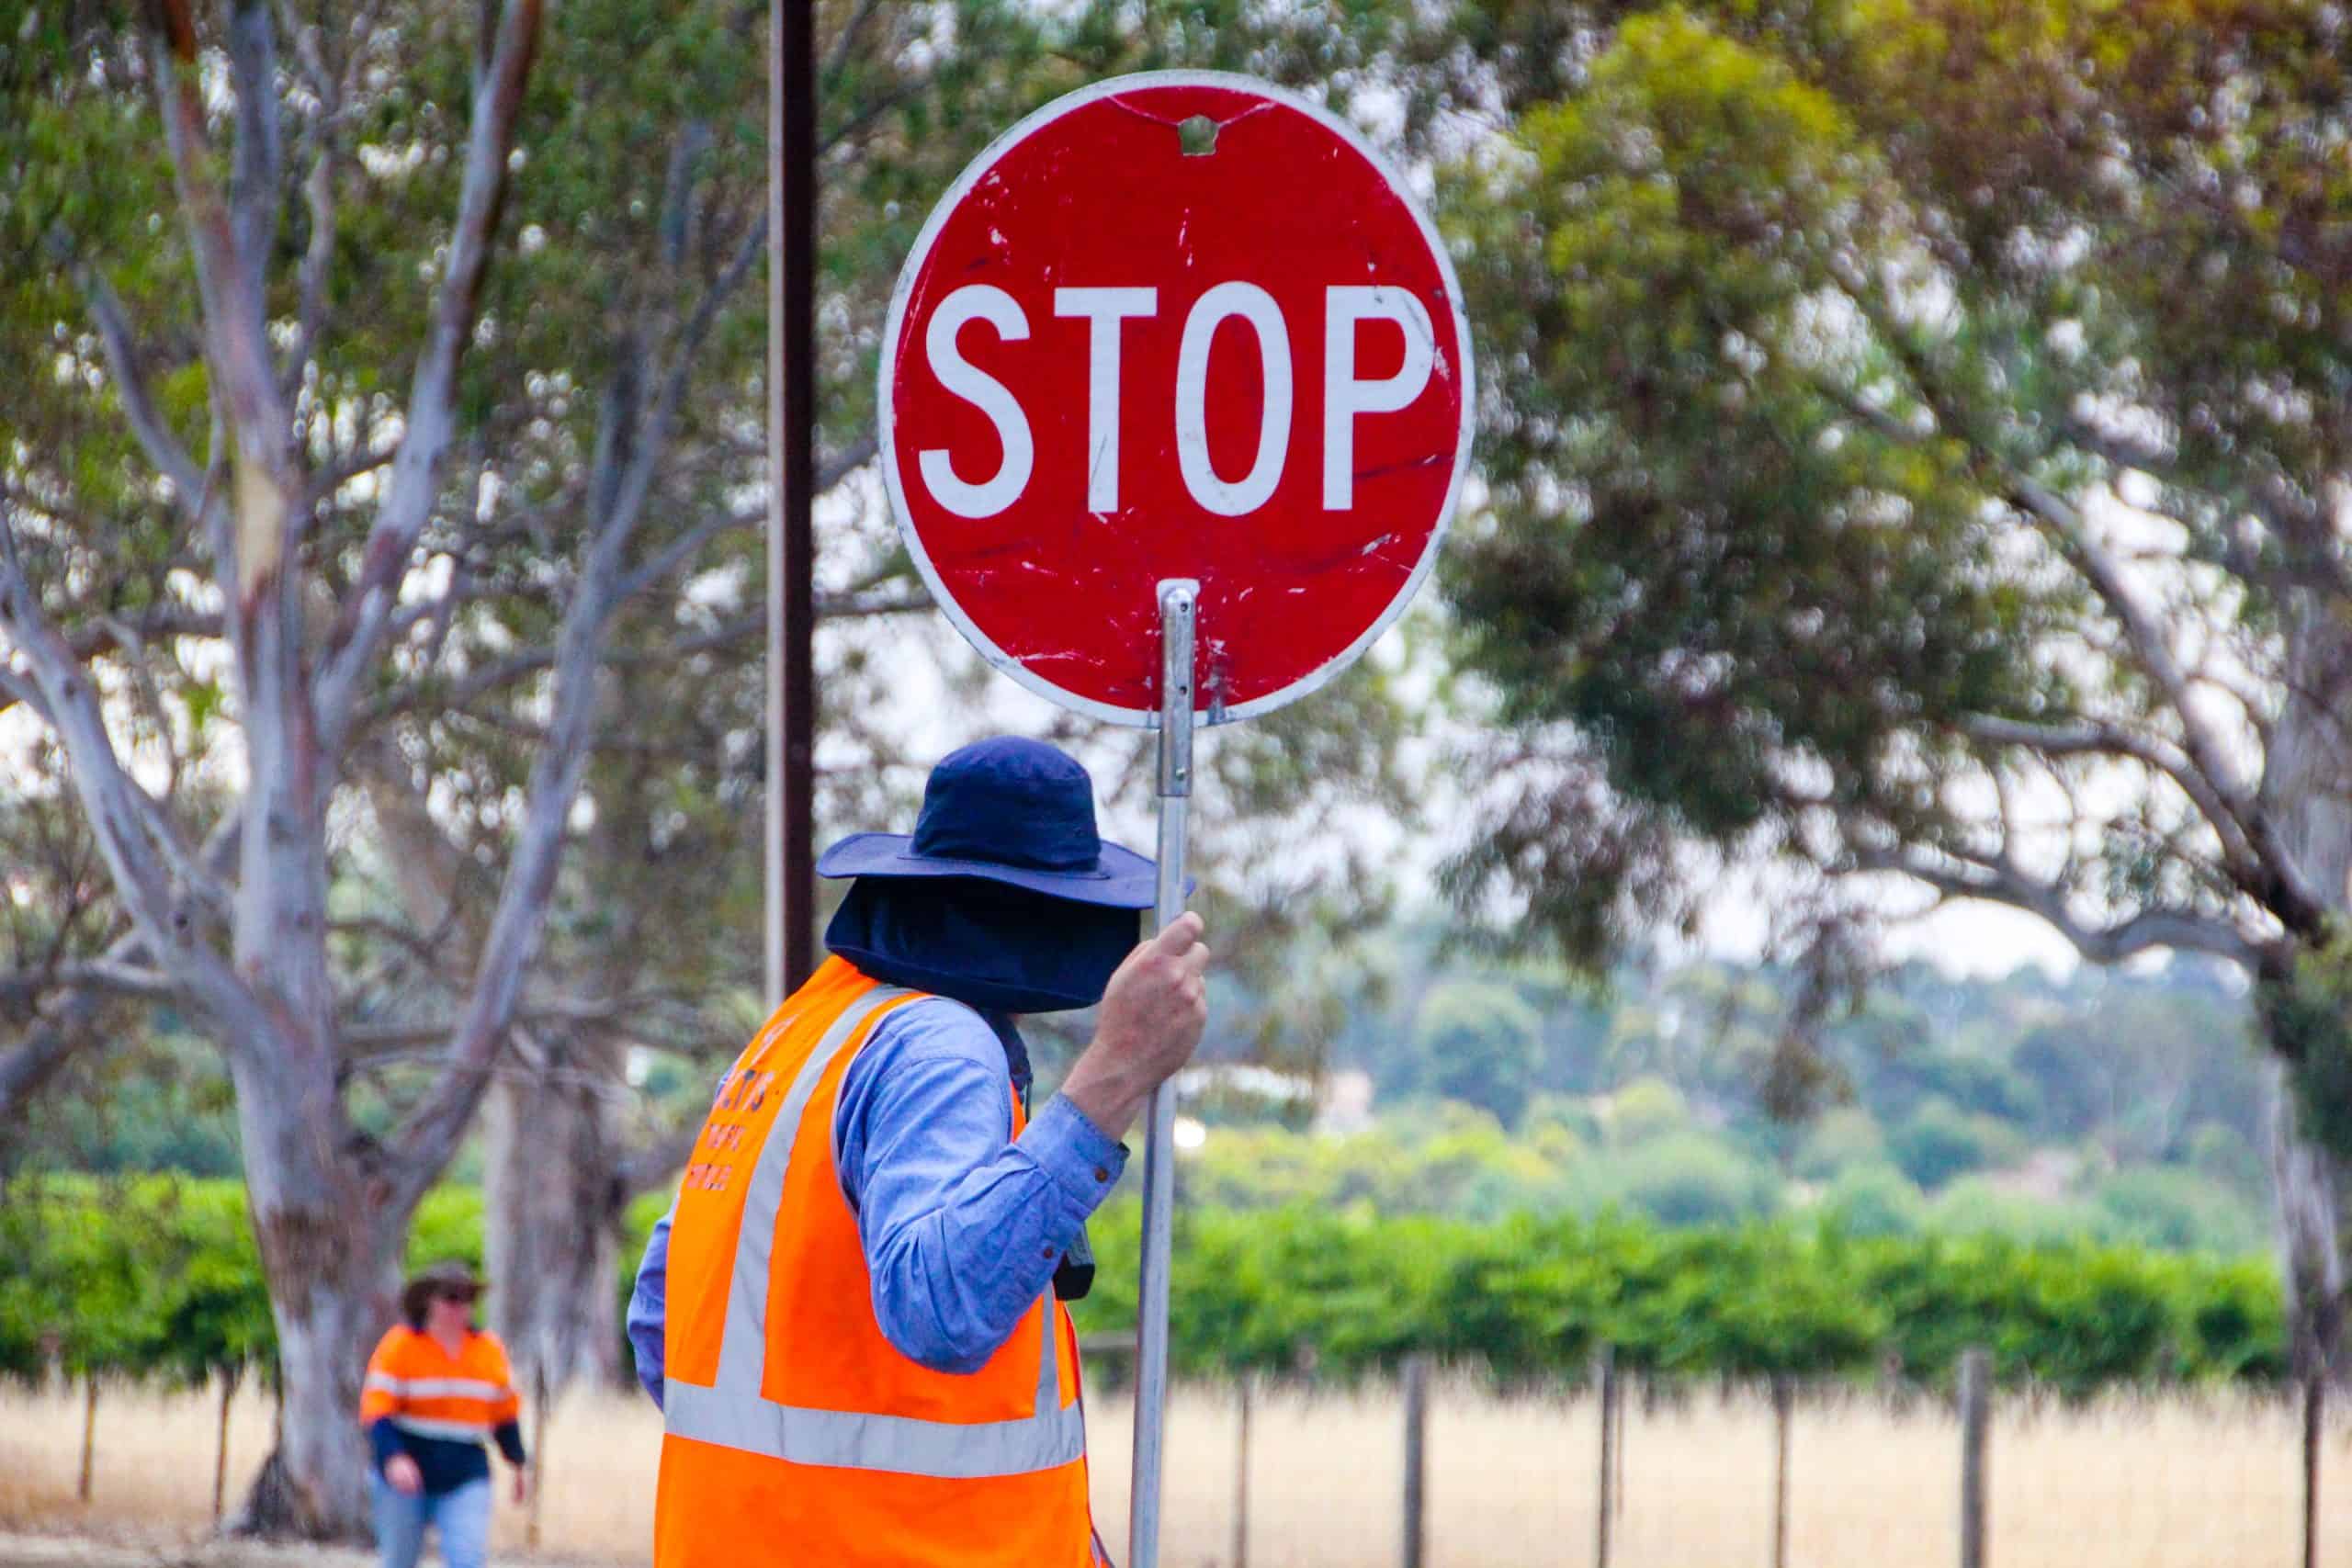 A man holding a stop sign in a safety vest.